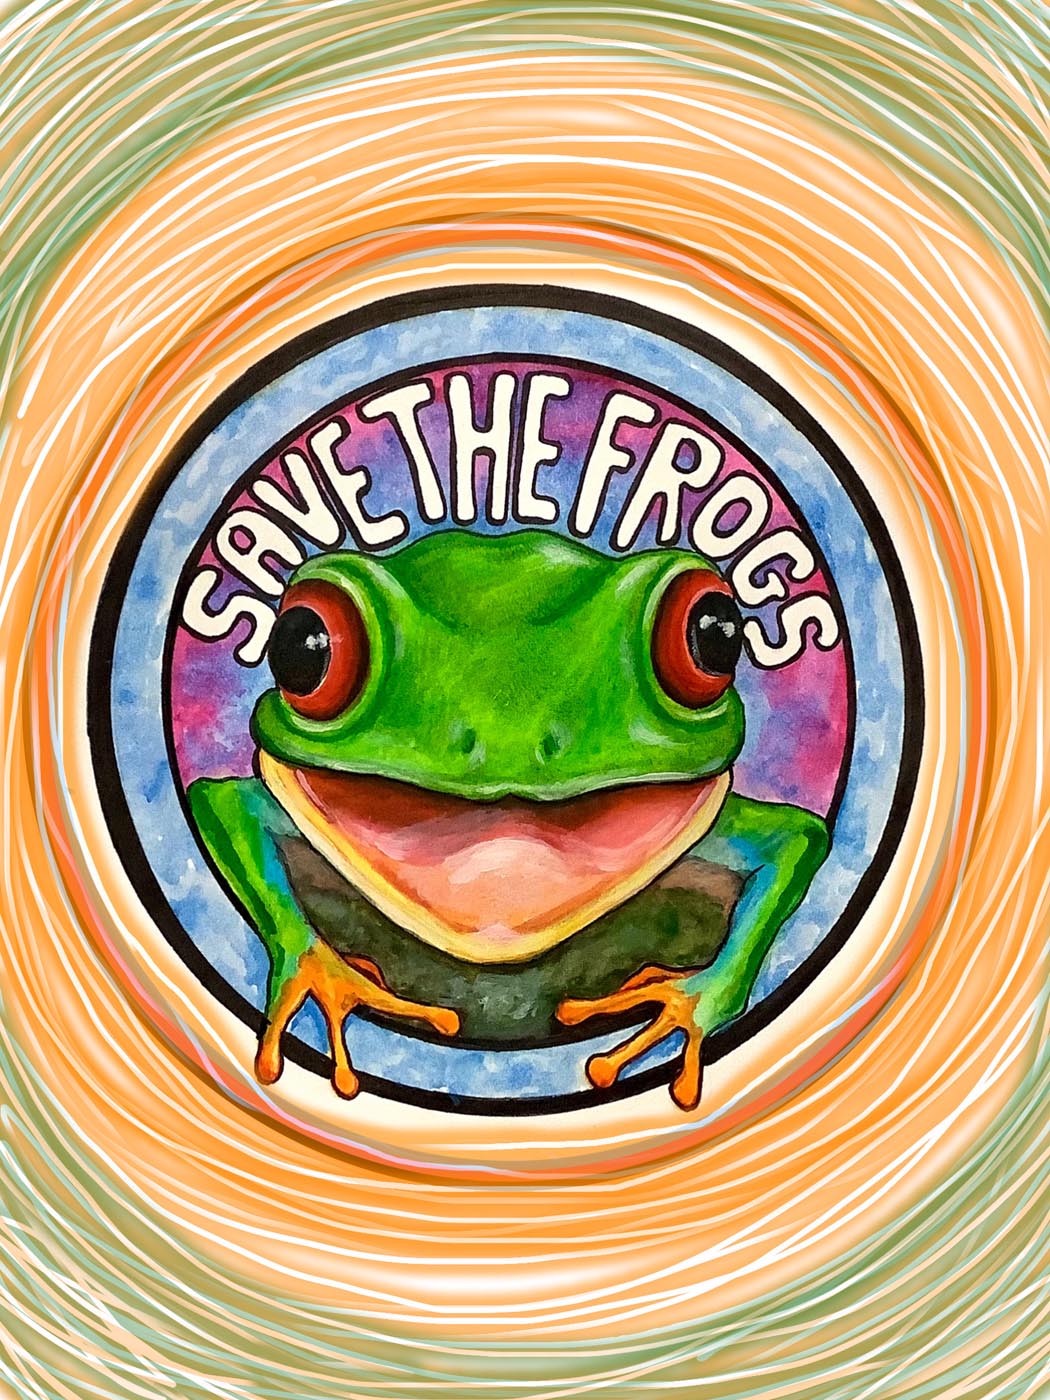 Ginger-Lee-USA-2021-save-the-frogs-art-contest Vincitore del 3° posto